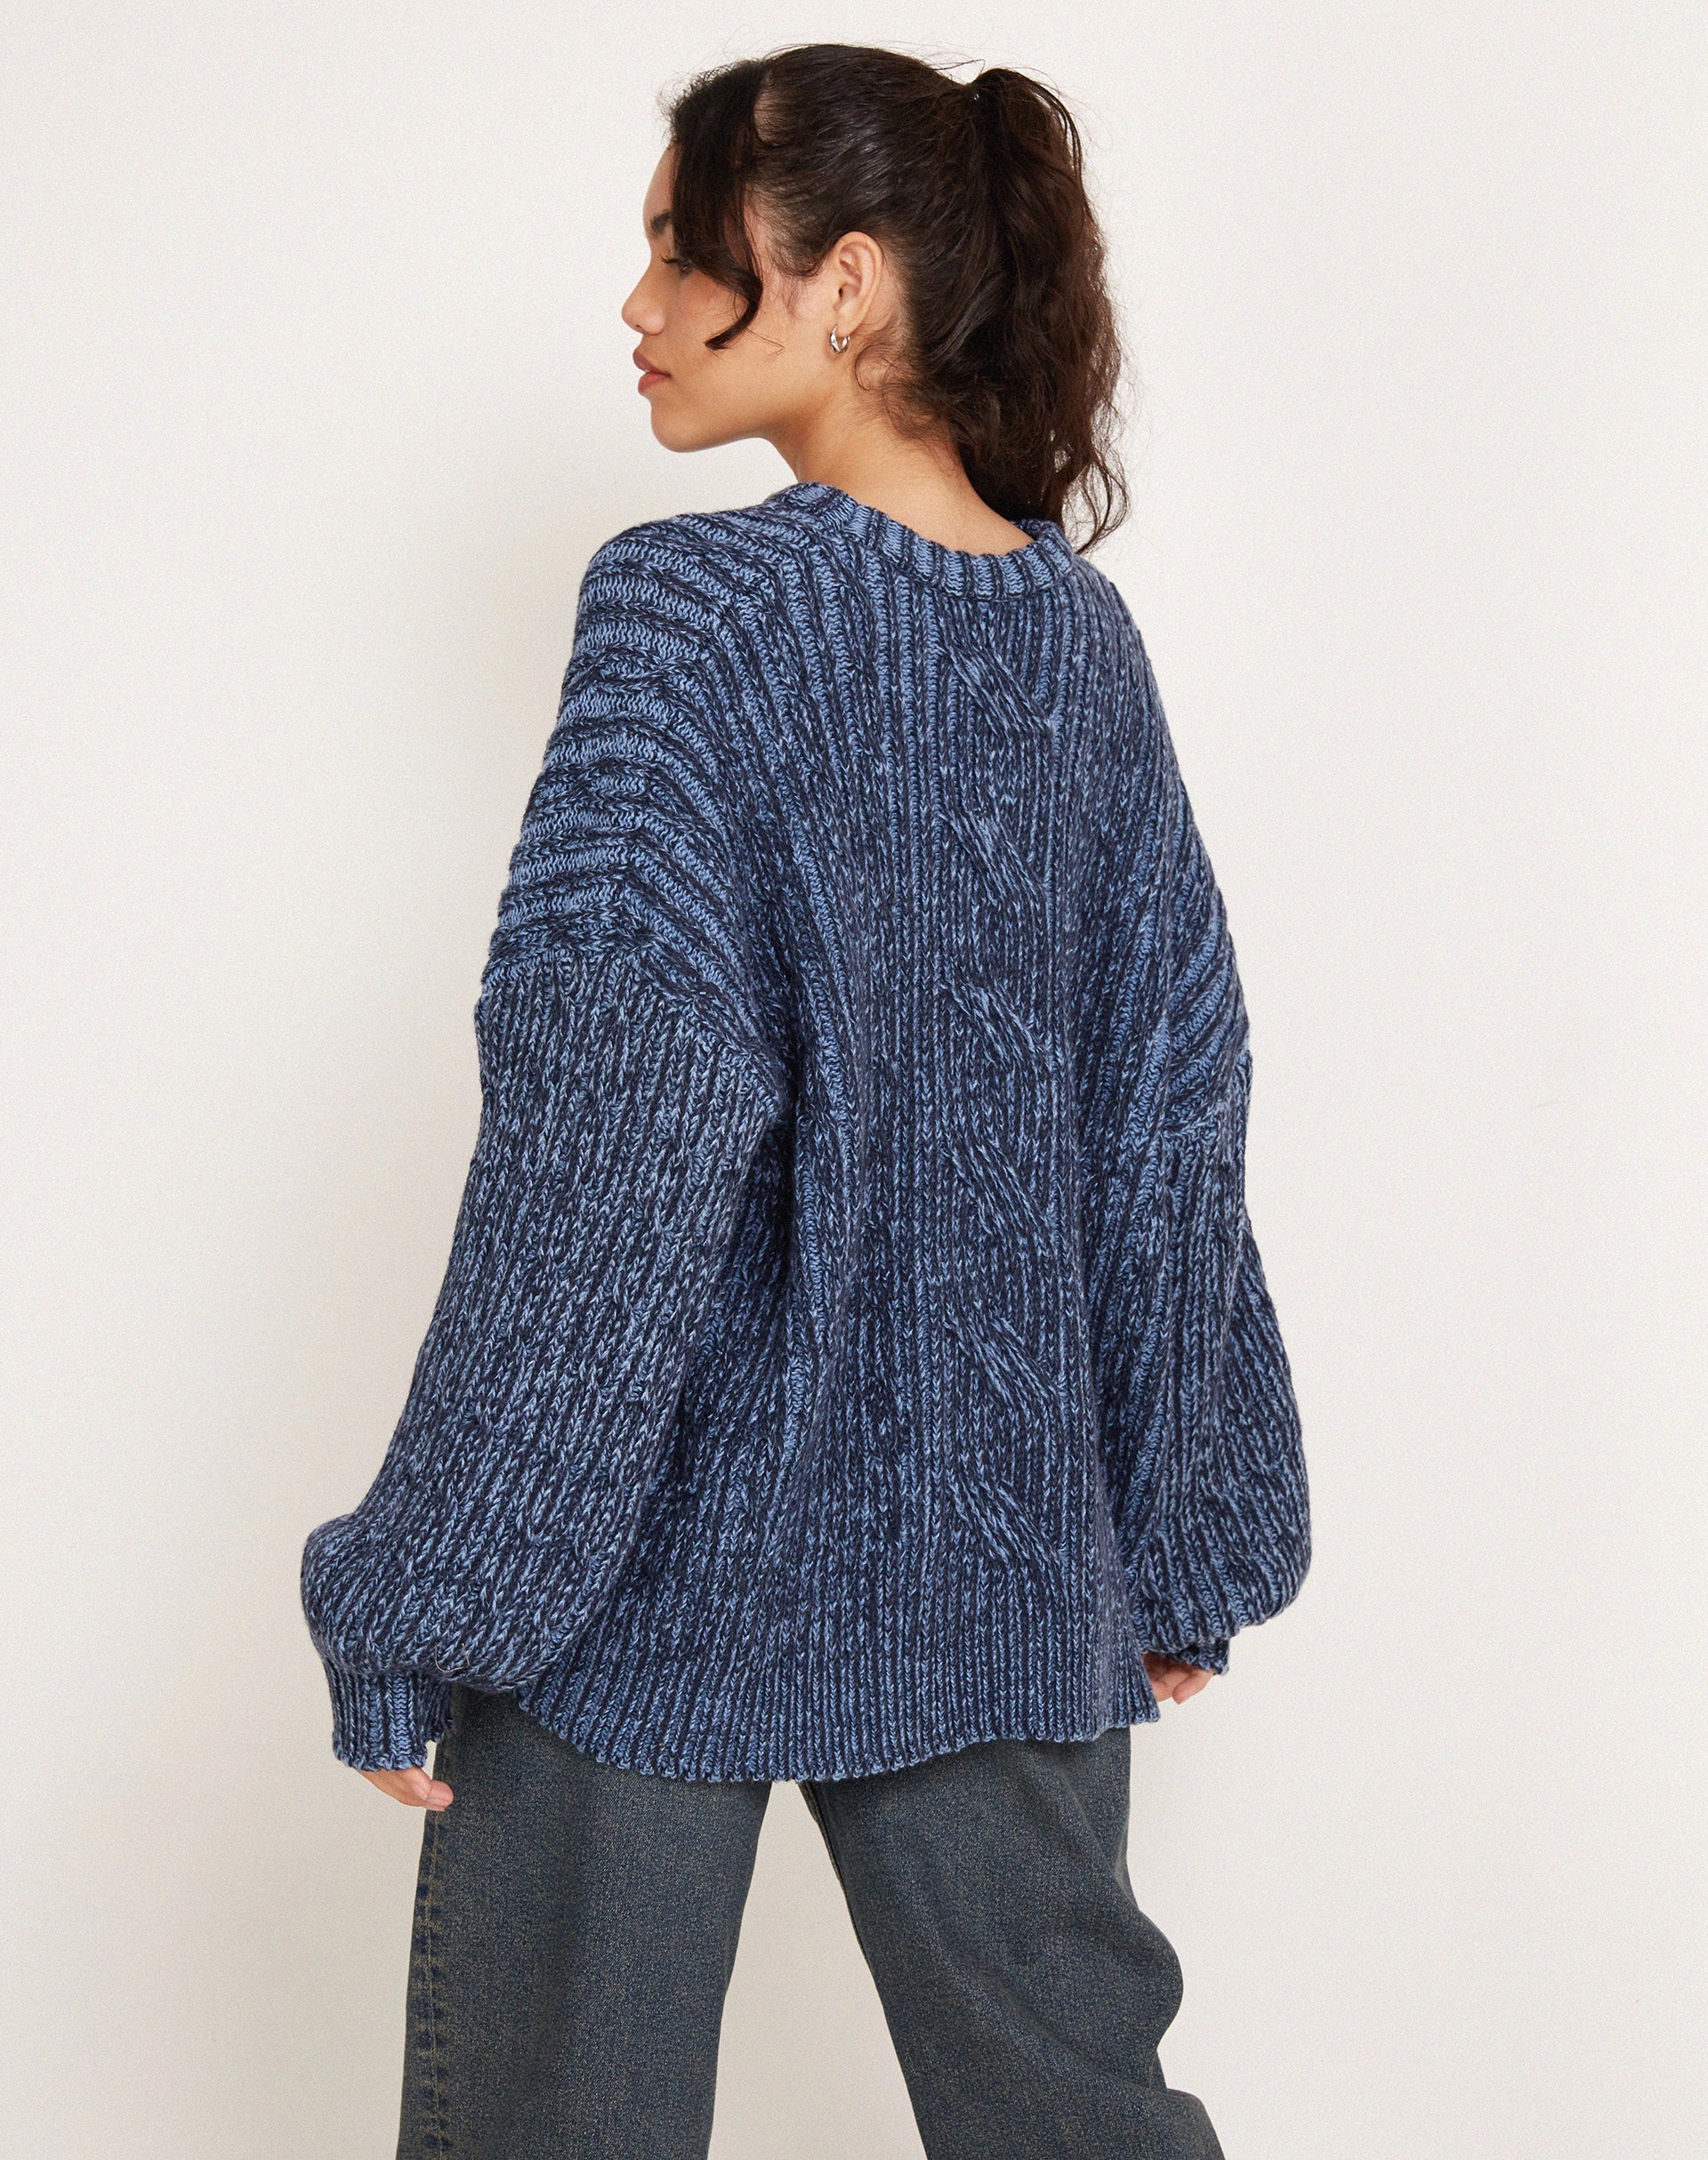 image of Ameita Knitted Jumper in Two Tone Blue